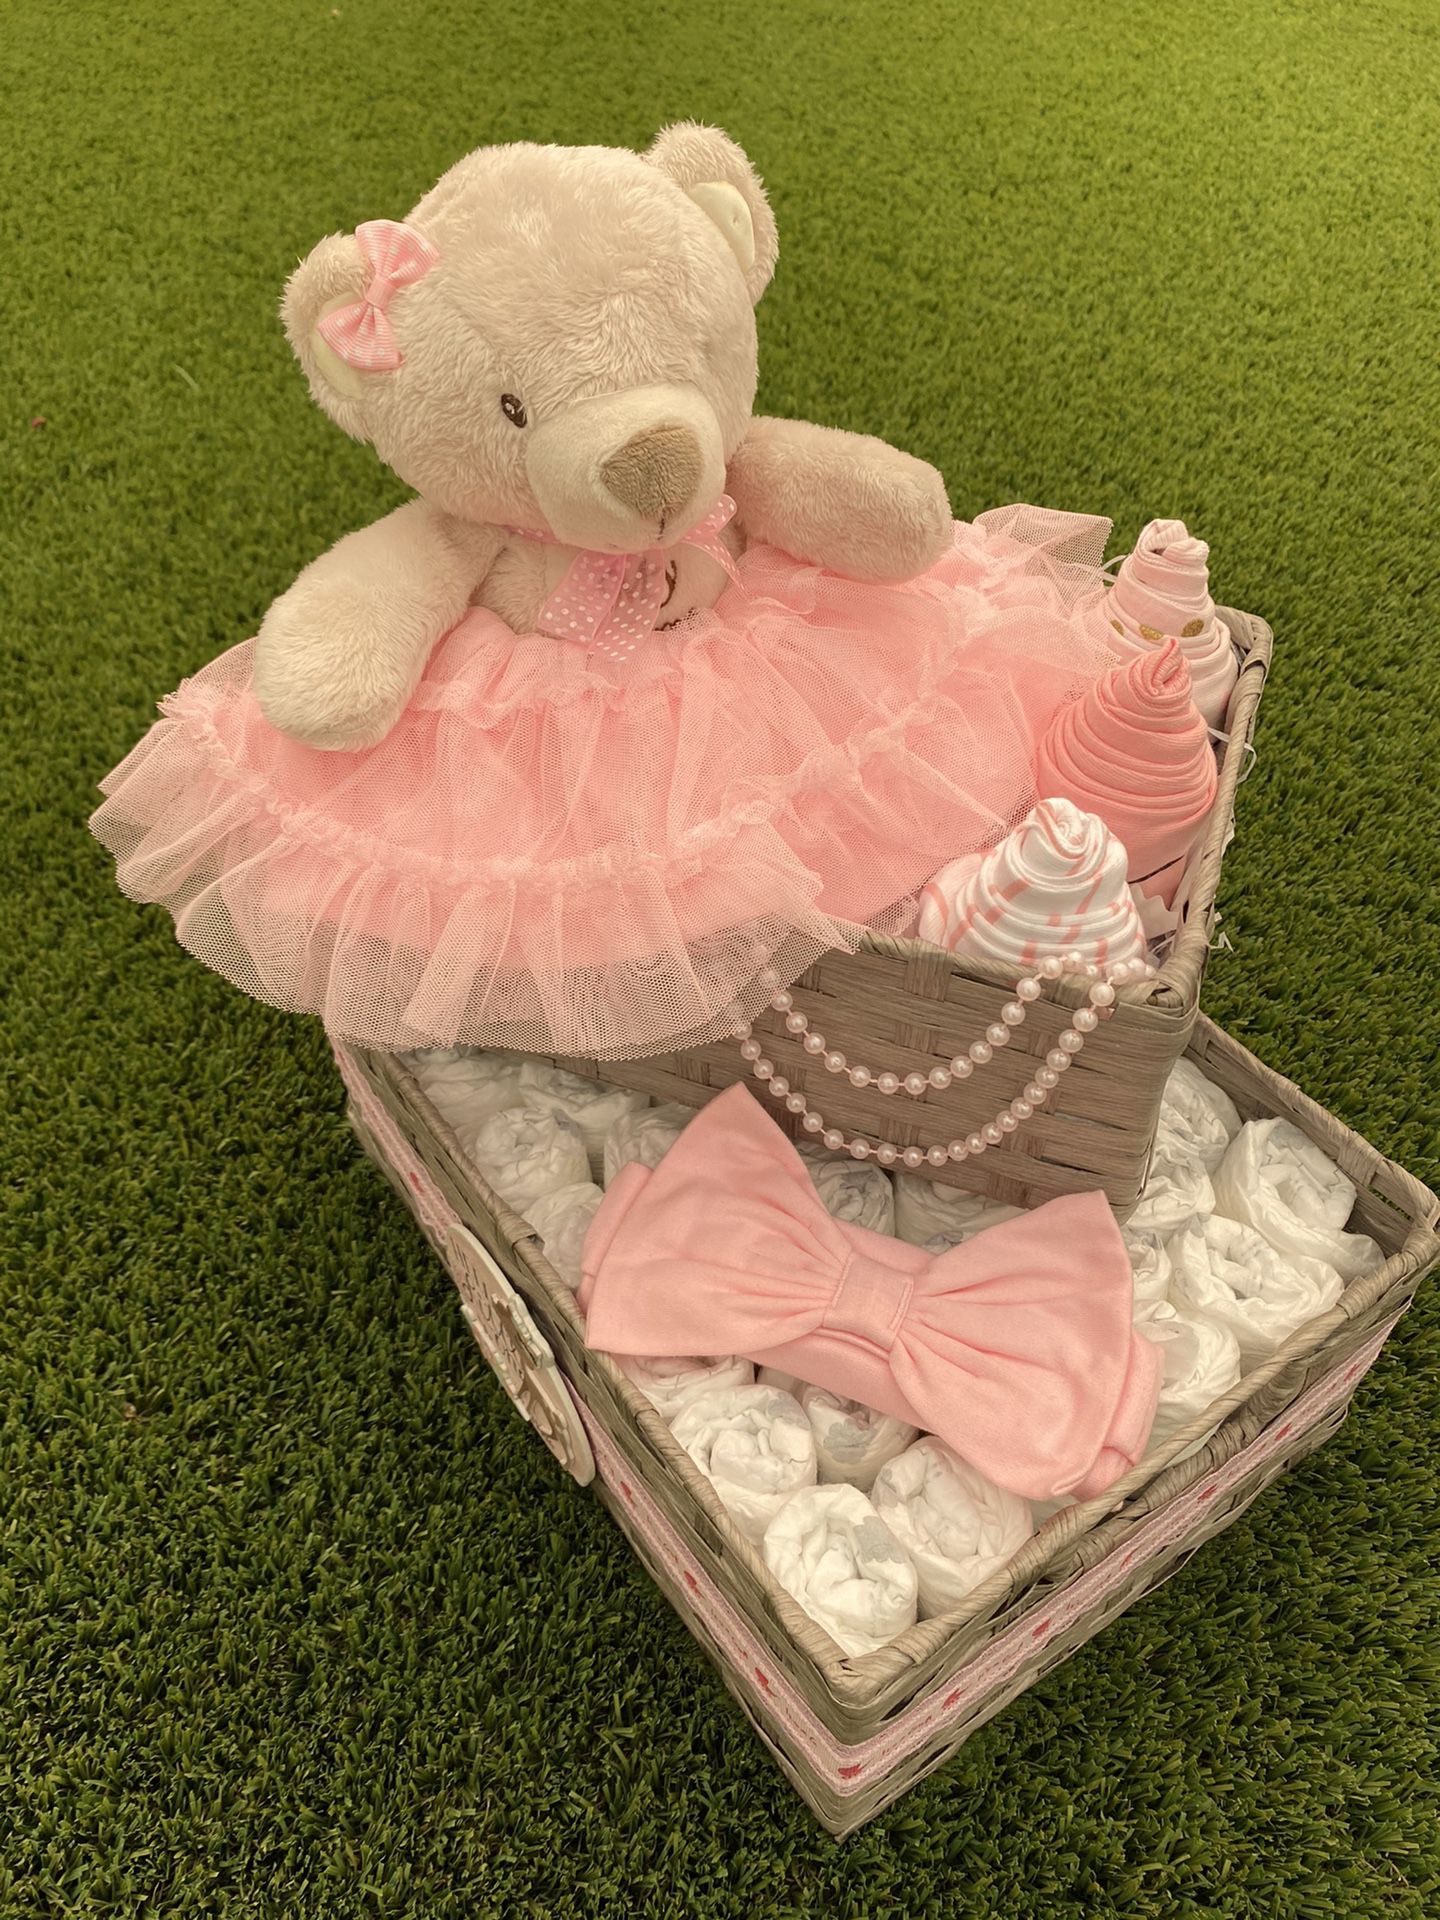 Pink Baby Girl Diaper Basket with Stuffed Teddy Bear, Two Tier Diaper Gift Basket with Decorations